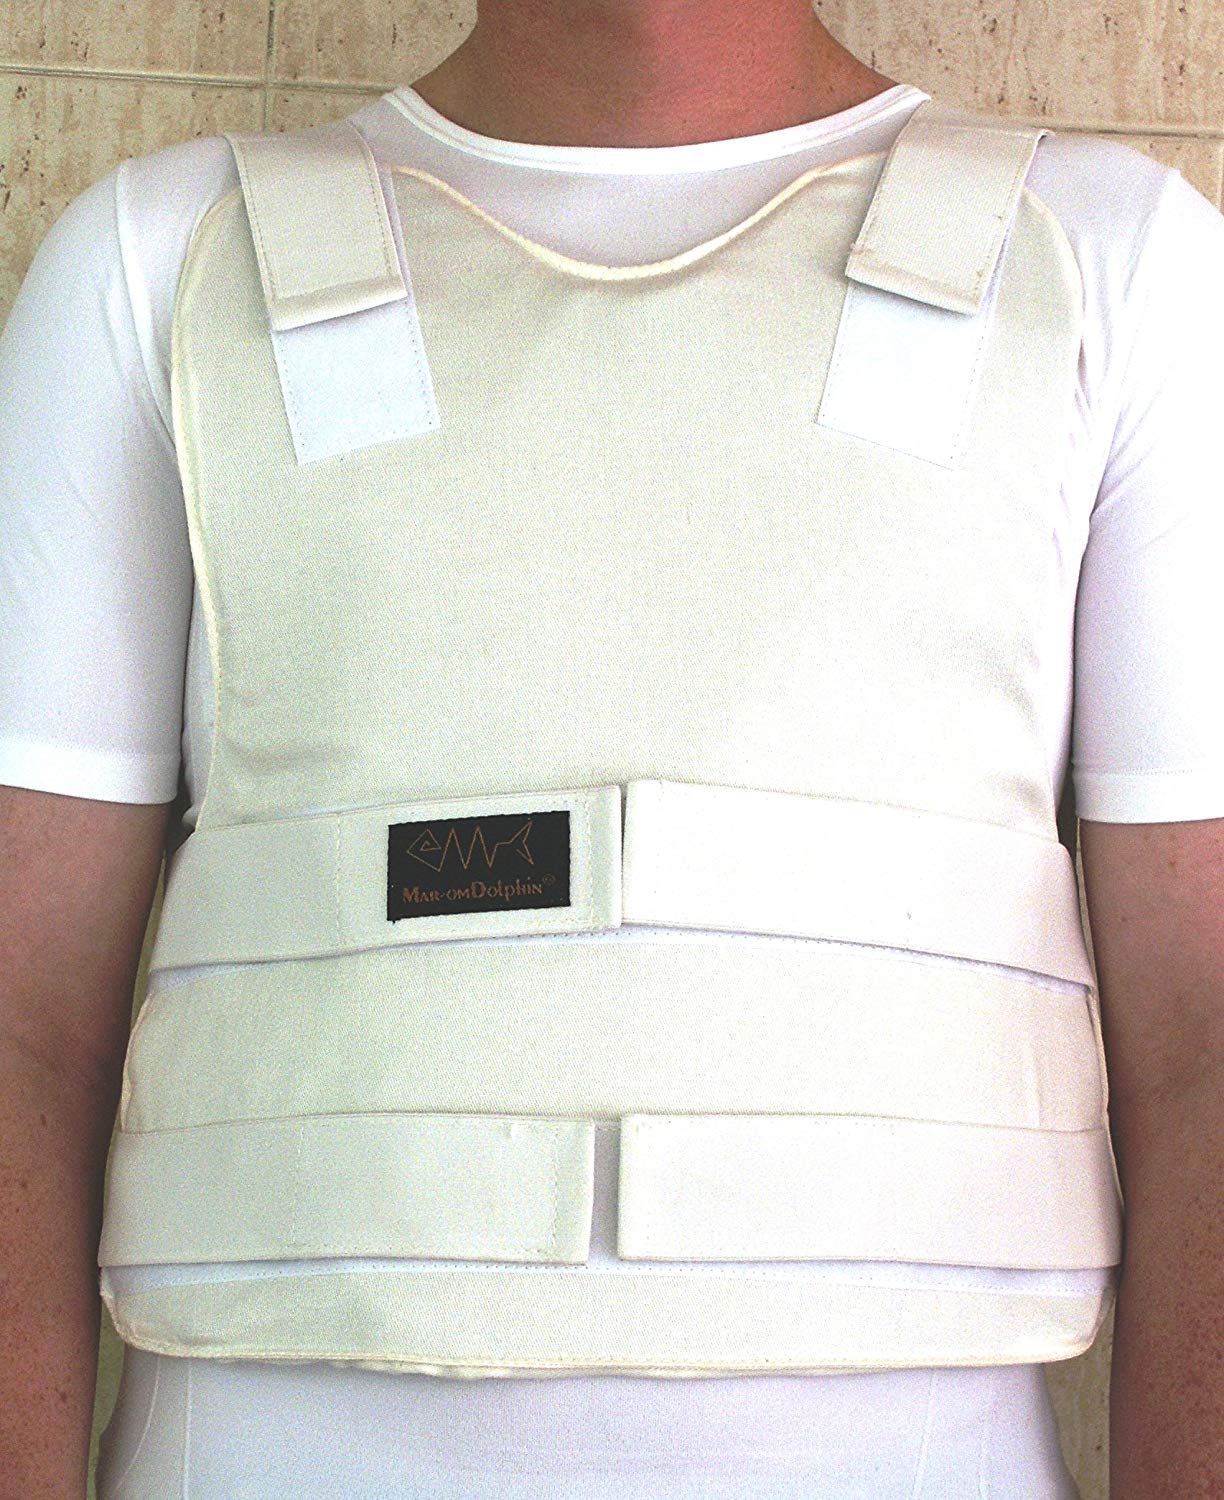 Basic Concealable Bulletproof Vest Level III A White